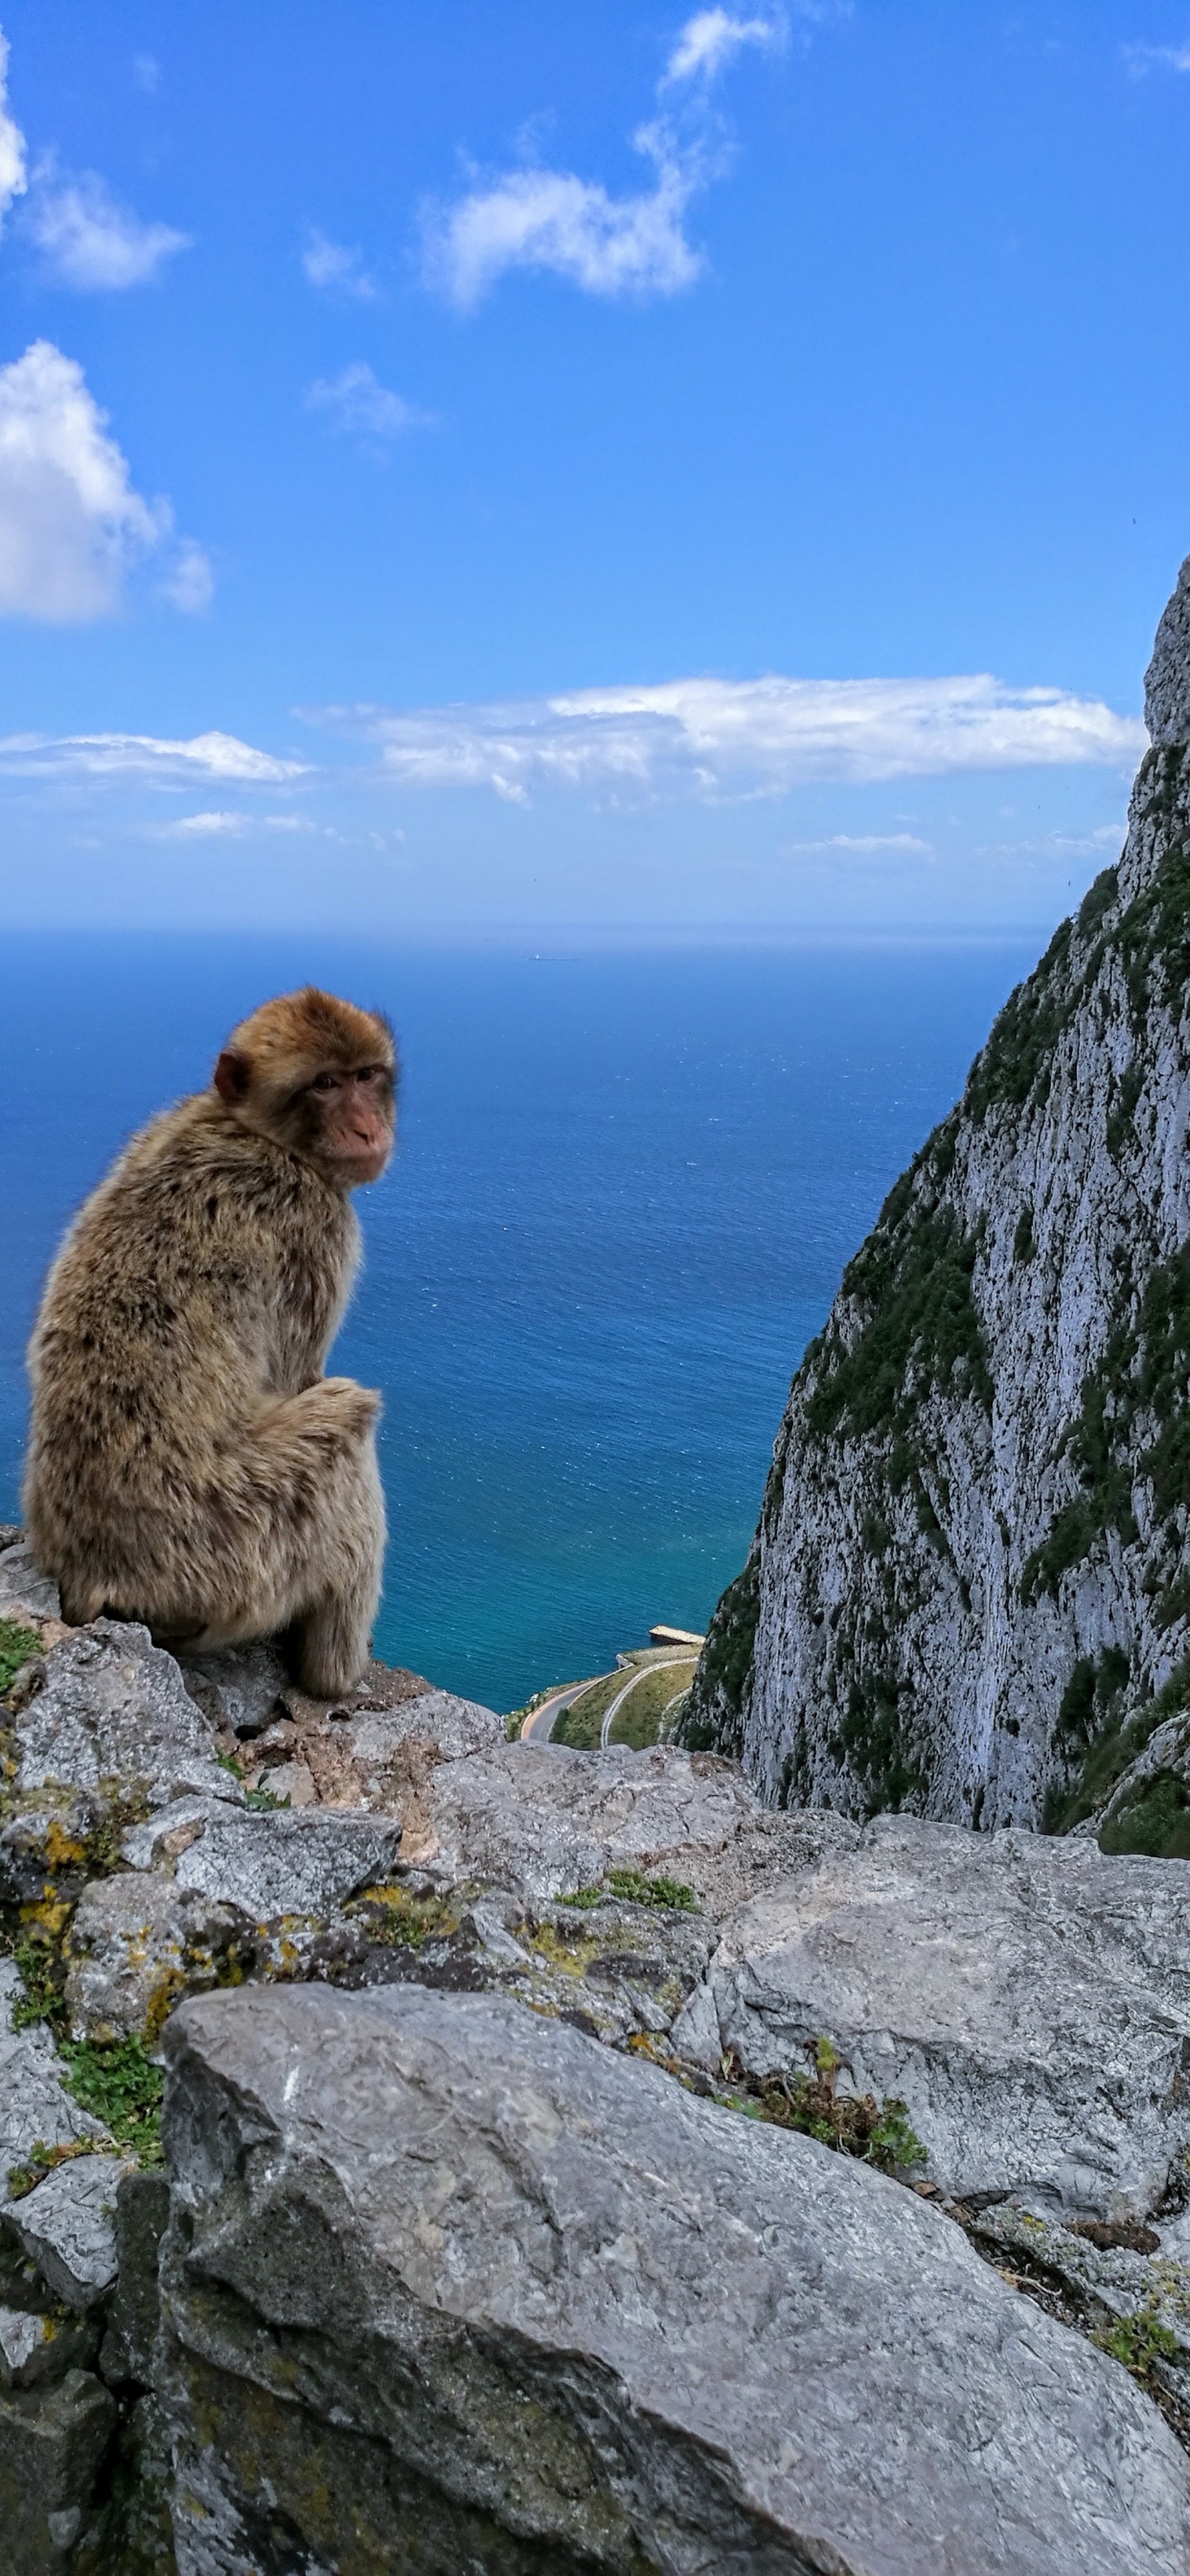 Brown Monkey Sitting on Gray Rock During Daytime. Wallpaper in 1242x2688 Resolution